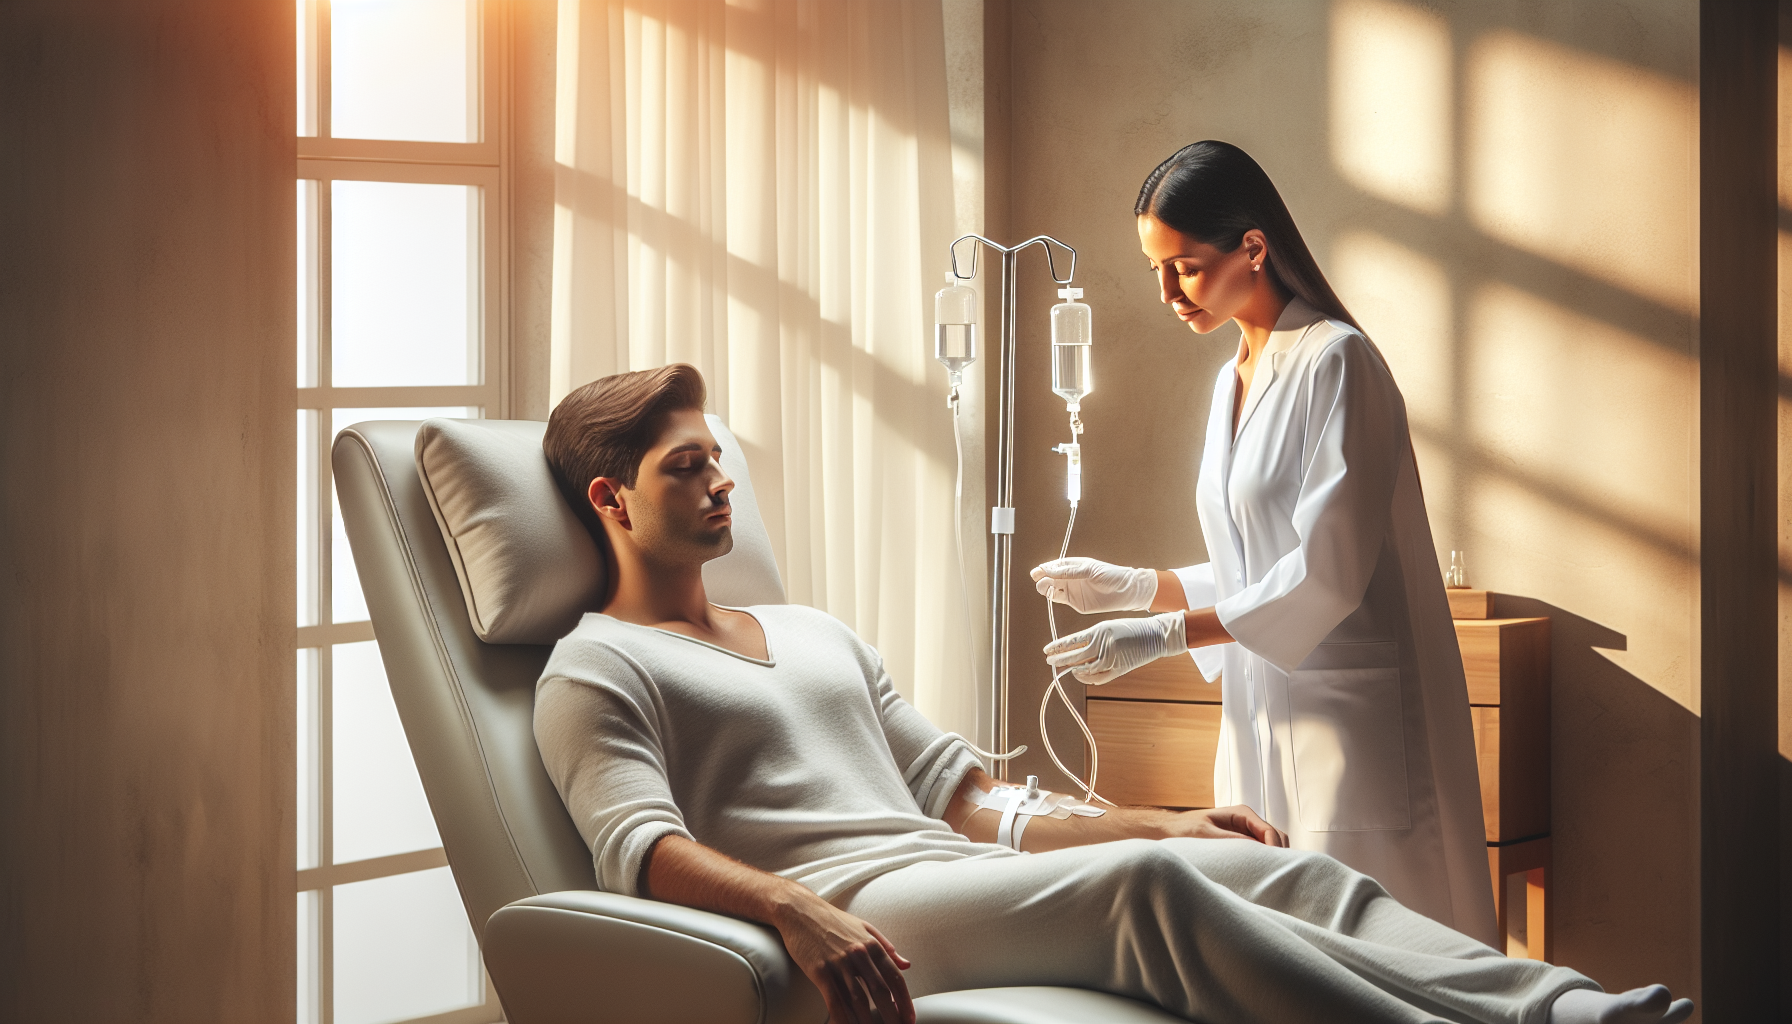 Illustration of a person receiving ketamine infusion therapy